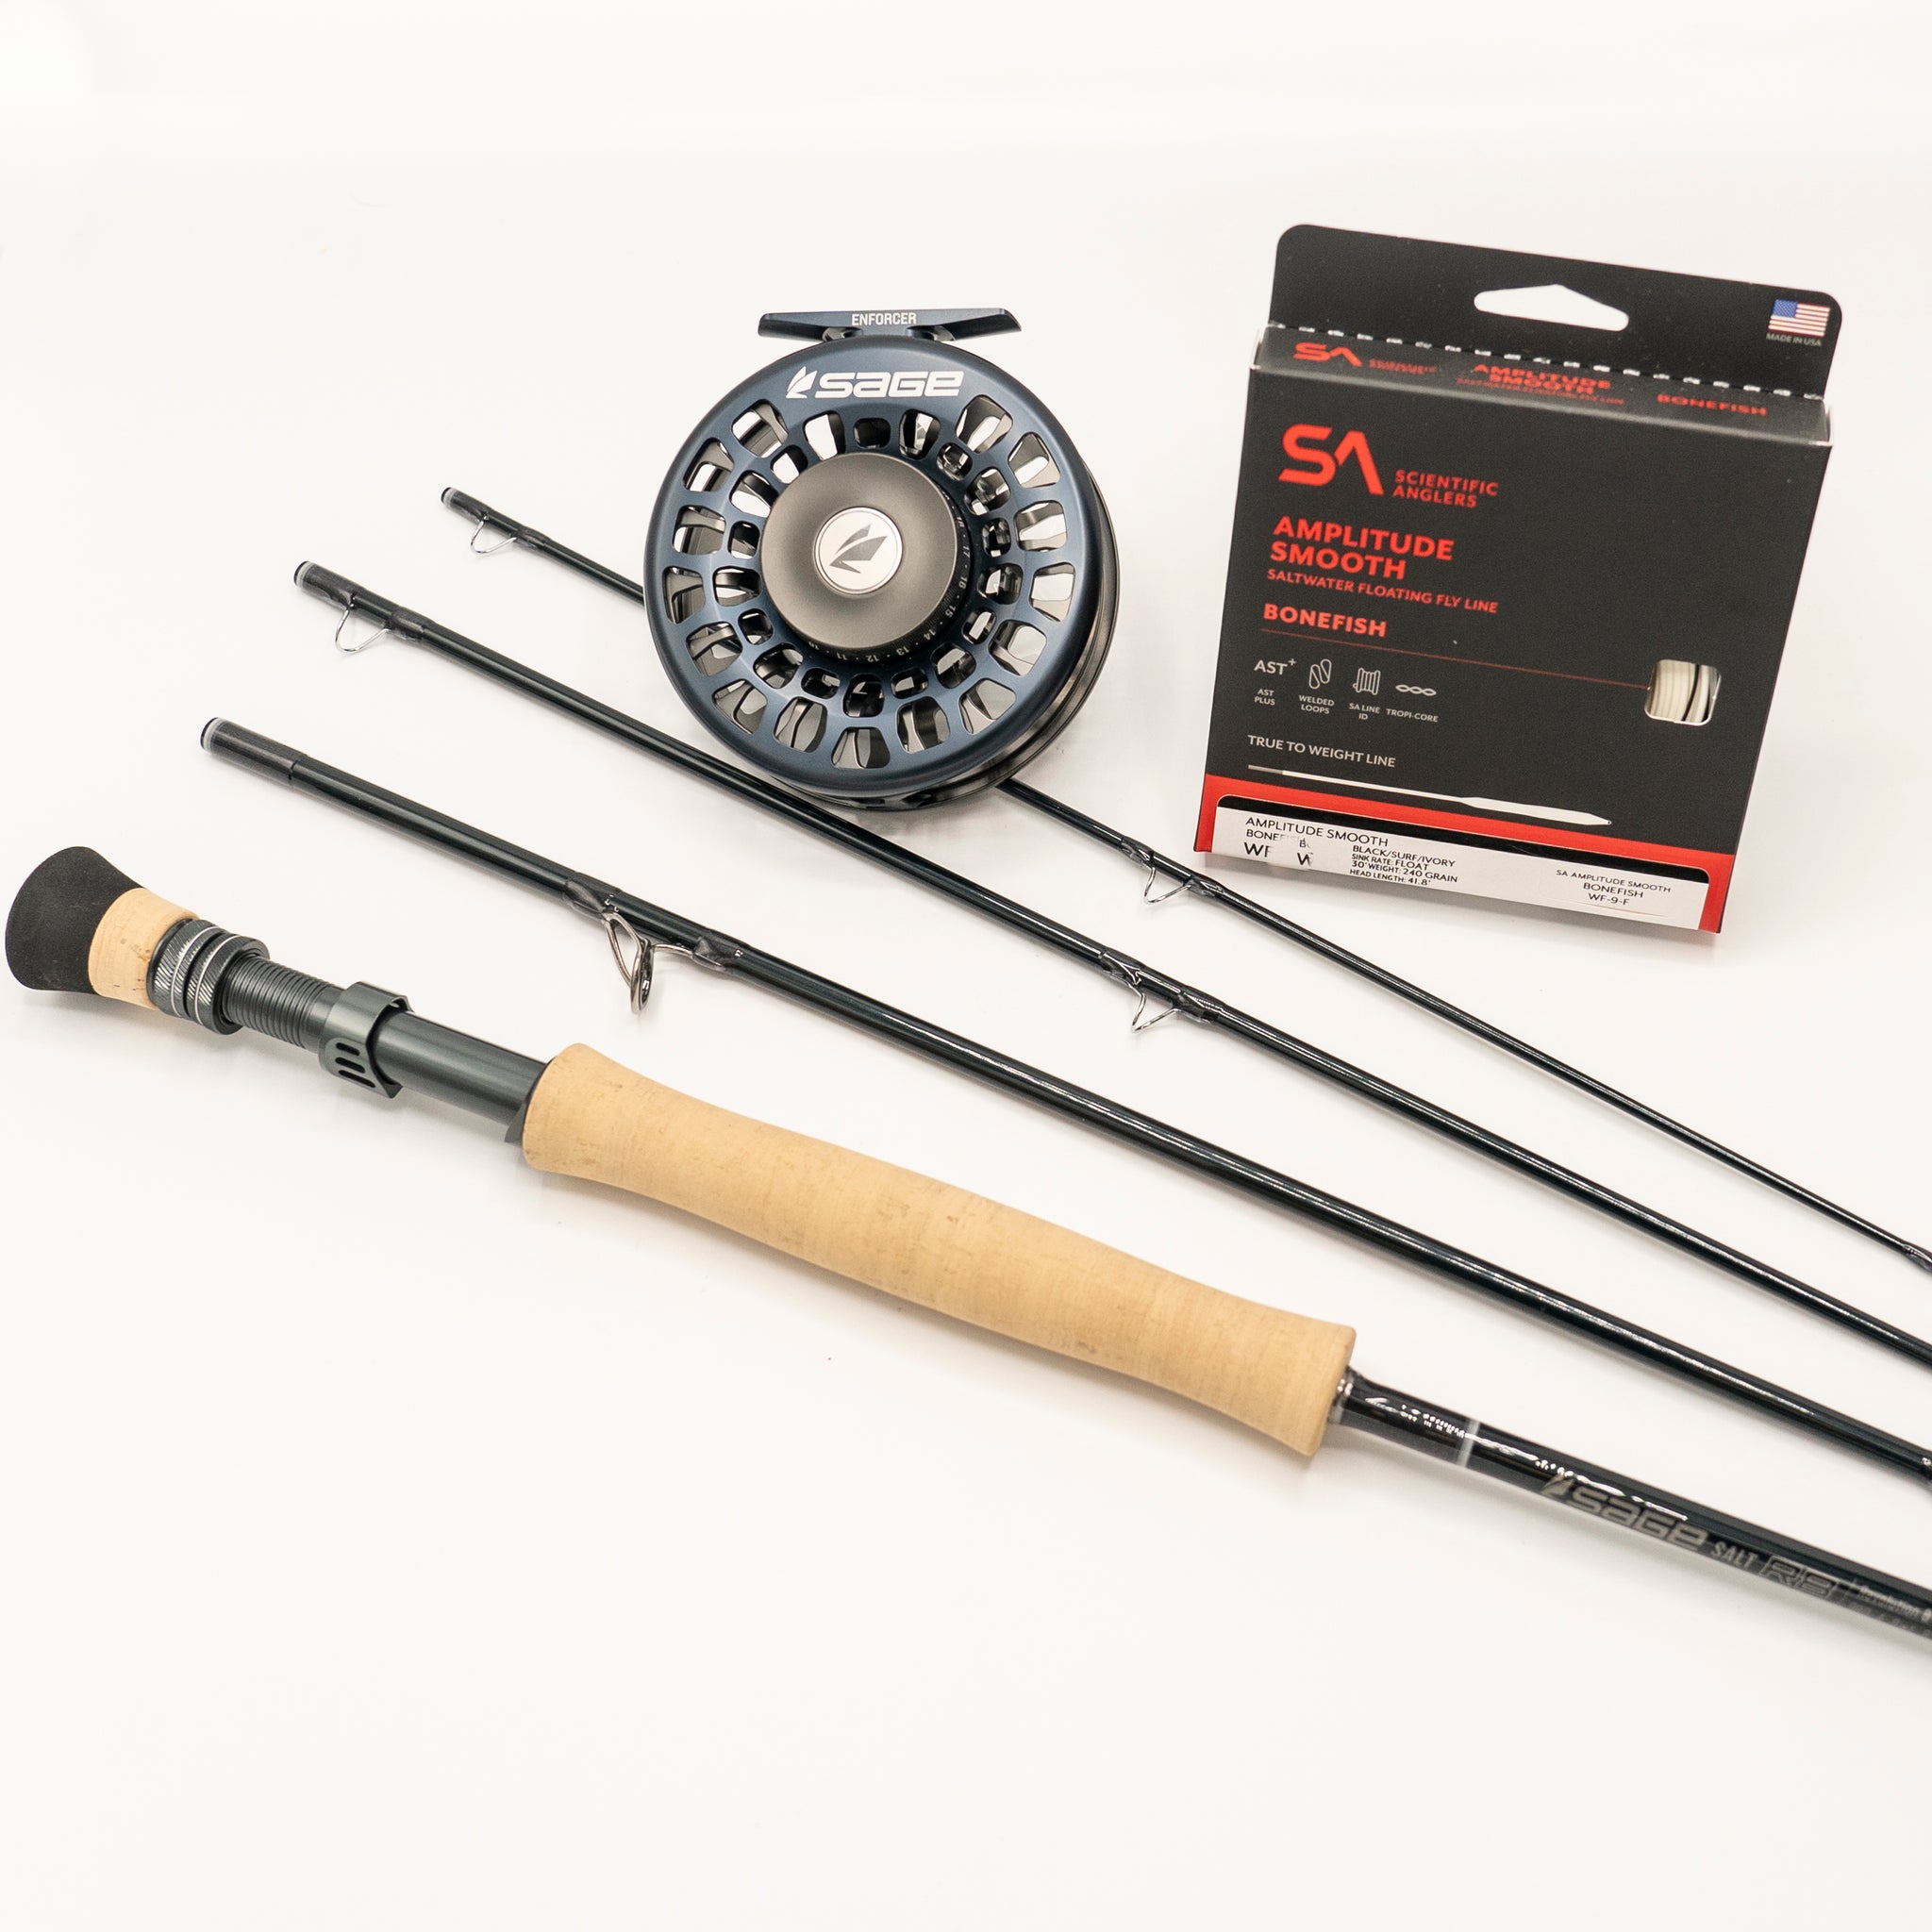 Pure Titanium Reel Seat and Masur Birch Full Wells Handle Fly Rod on  PopScreen